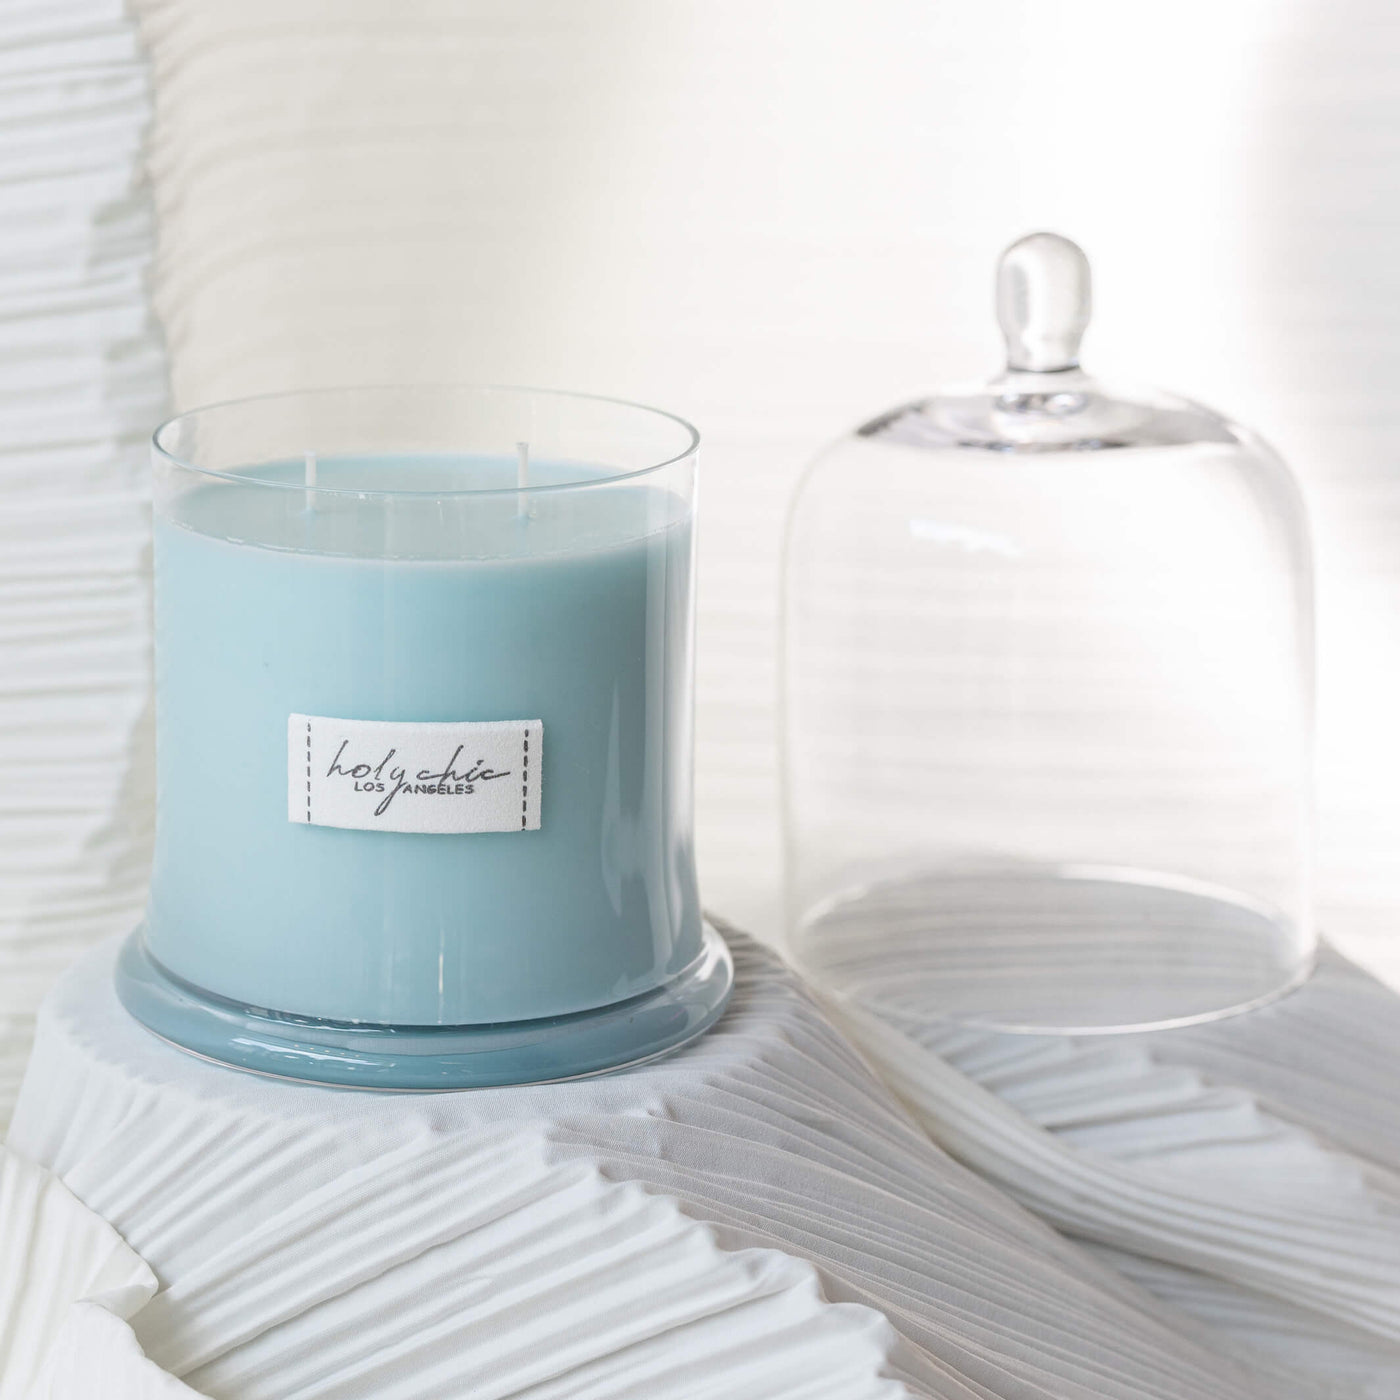 A scented candle in a light blue color